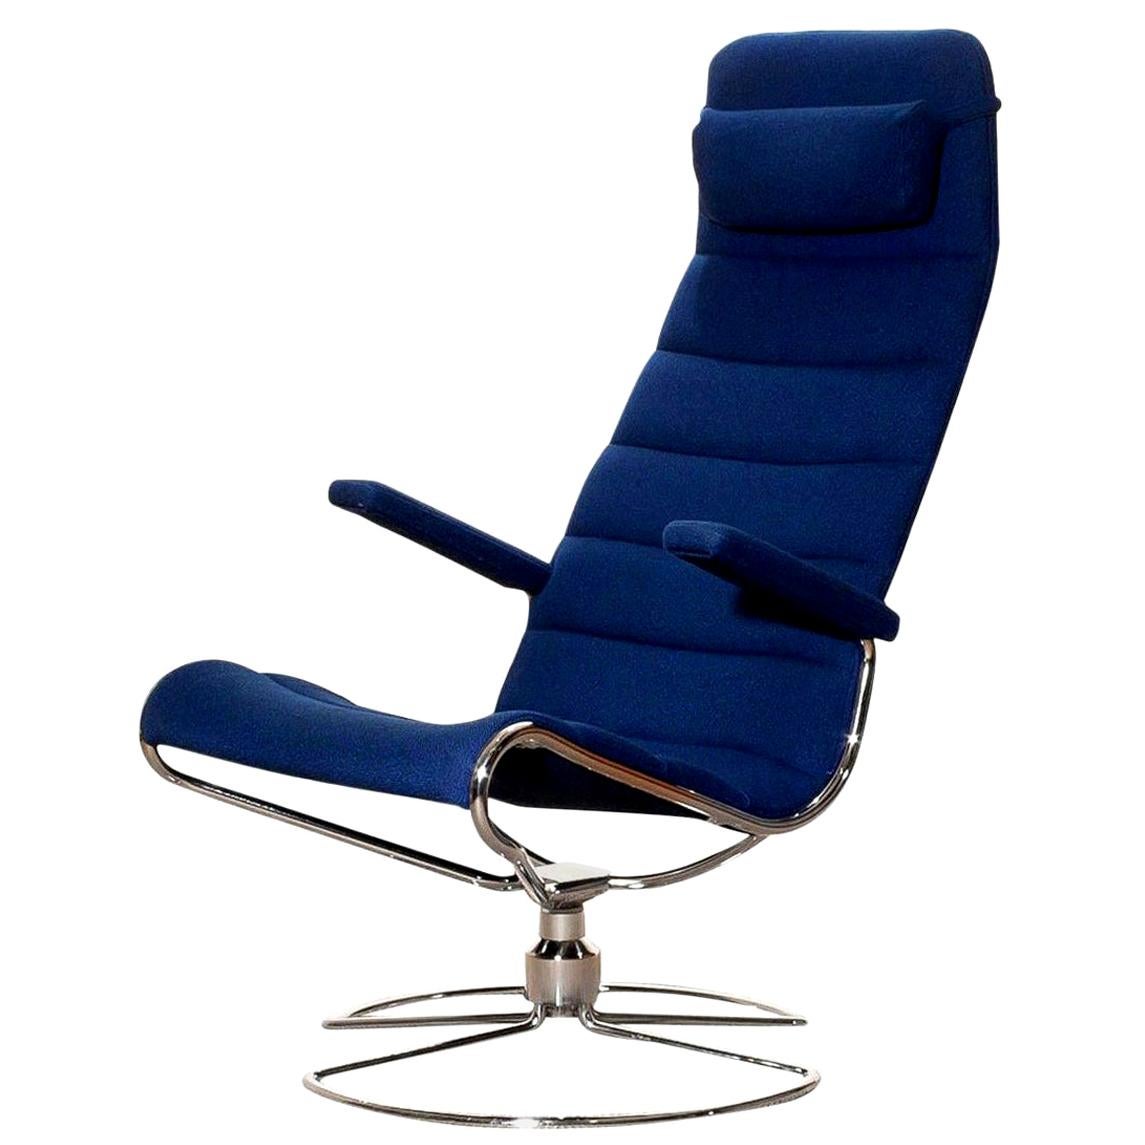 Beautiful 'Minister' chair designed by Bruno Mathsson.
It is upholstered with a royal blue wooden fabric mounted on a swivel base of tubular chromed steel.
The chair is in very good condition.
Period: 1980s.
Dimensions: H 109 cm x W 60 cm x D 77